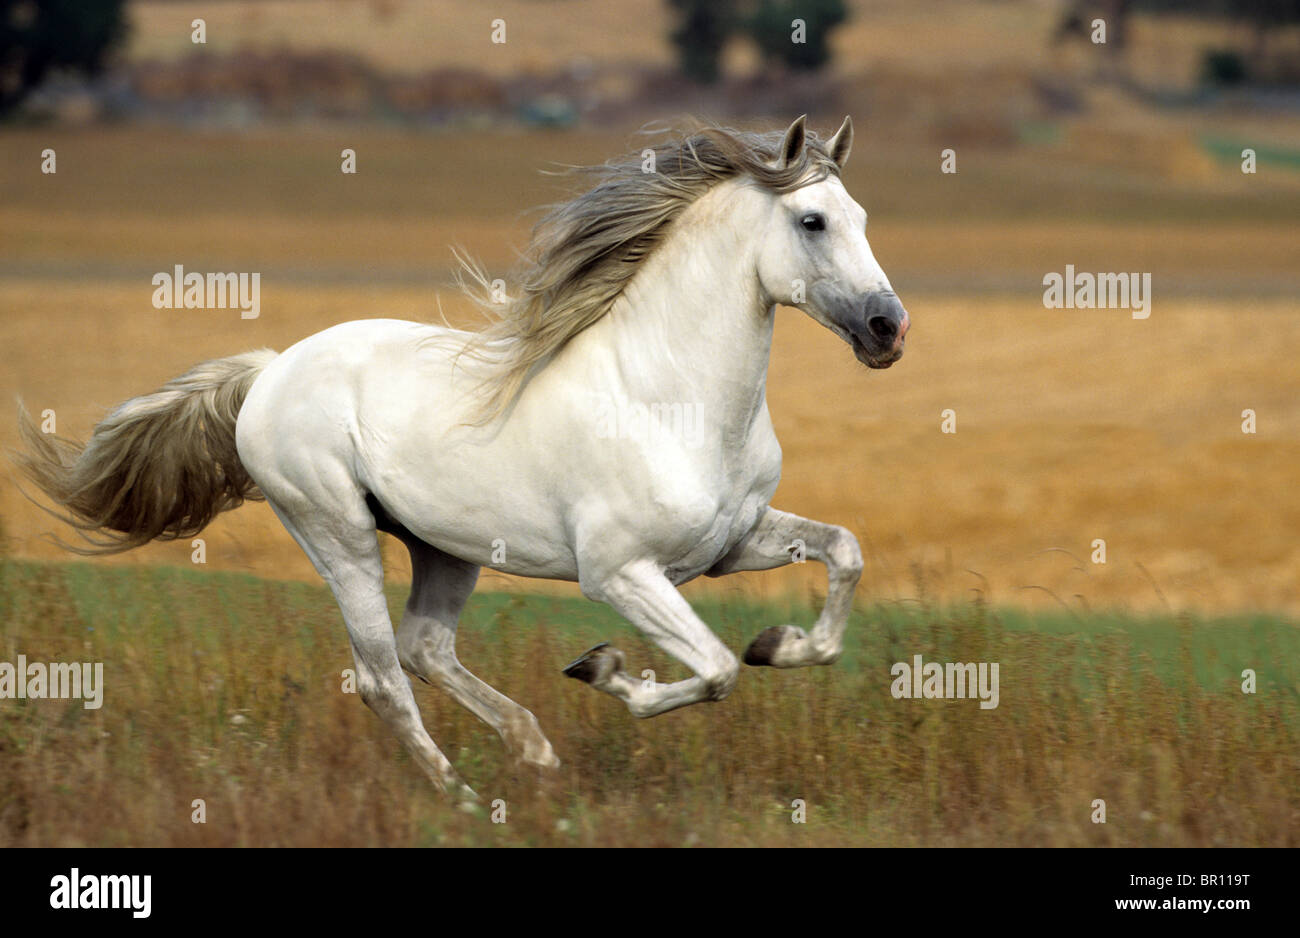 Andalusian Horse (Equus caballus), stallion at a gallop on a field. Stock Photo